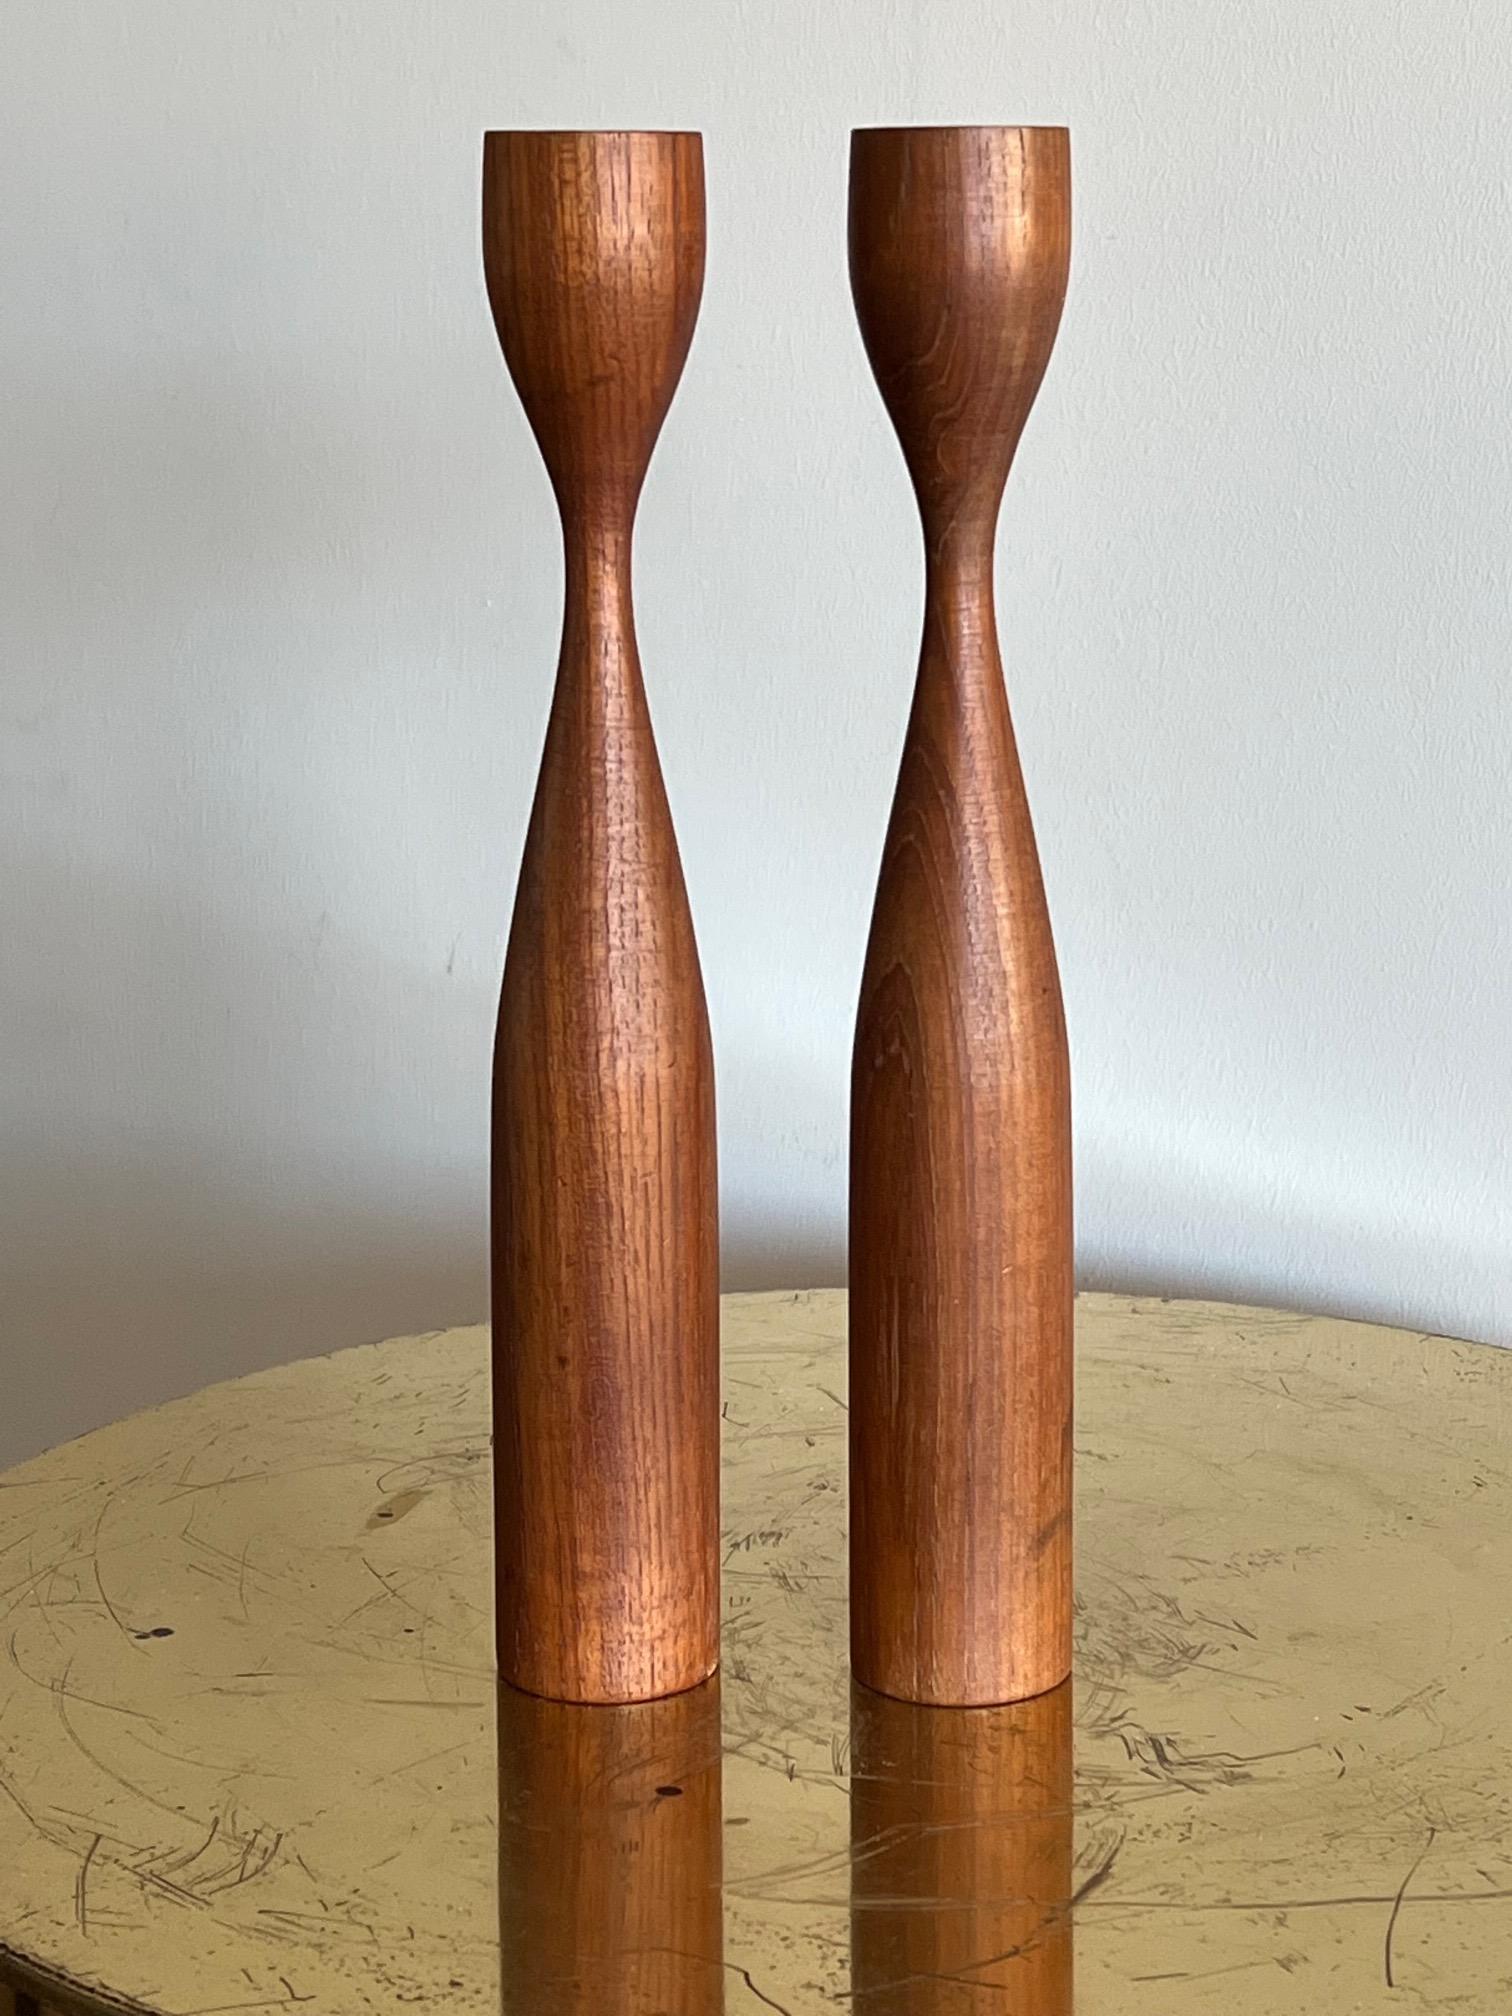 A pair of elegant vintage 1960's candlesticks. Turned teak wood, made in Denmark. Brass candleholders inside. The teak has a really nice graining and vintage patina.